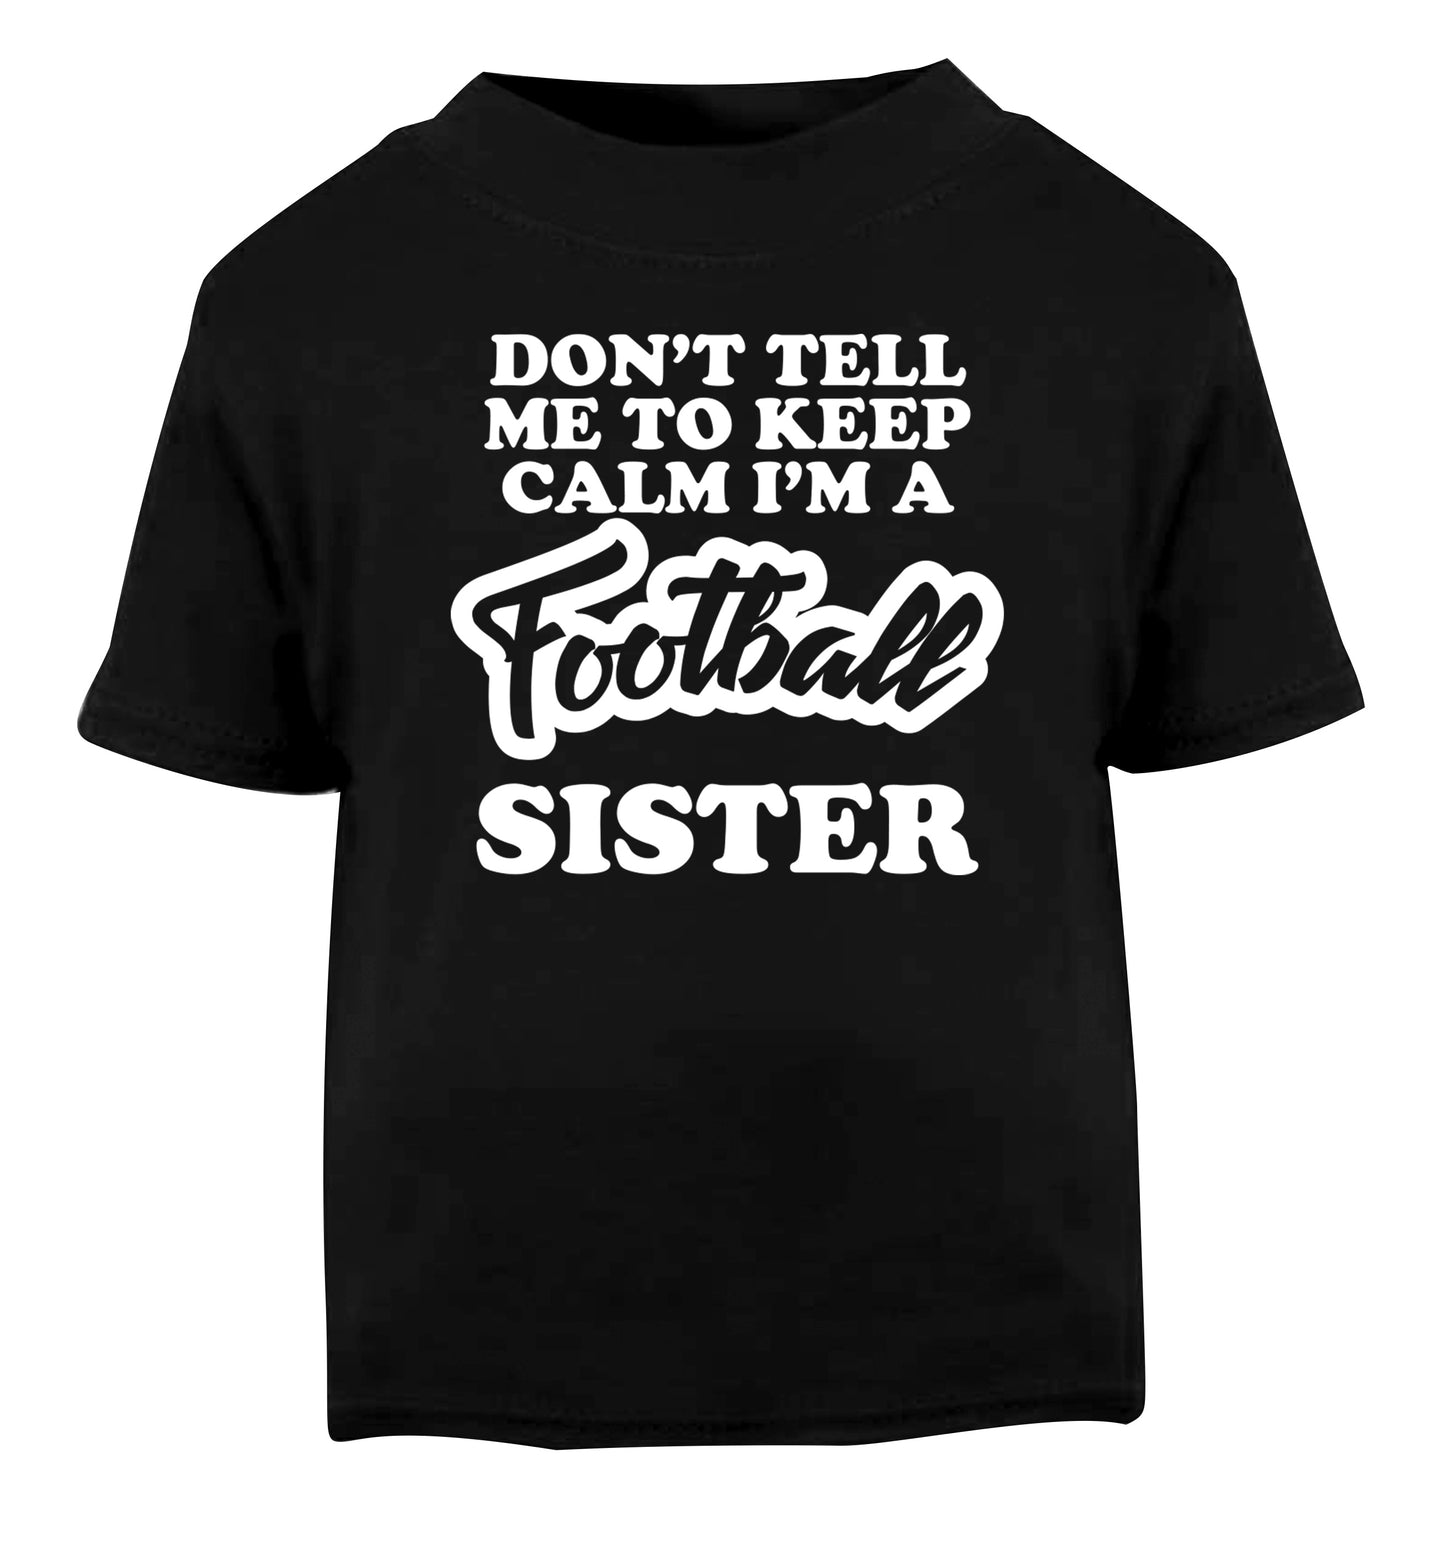 Don't tell me to keep calm I'm a football sister Black Baby Toddler Tshirt 2 years